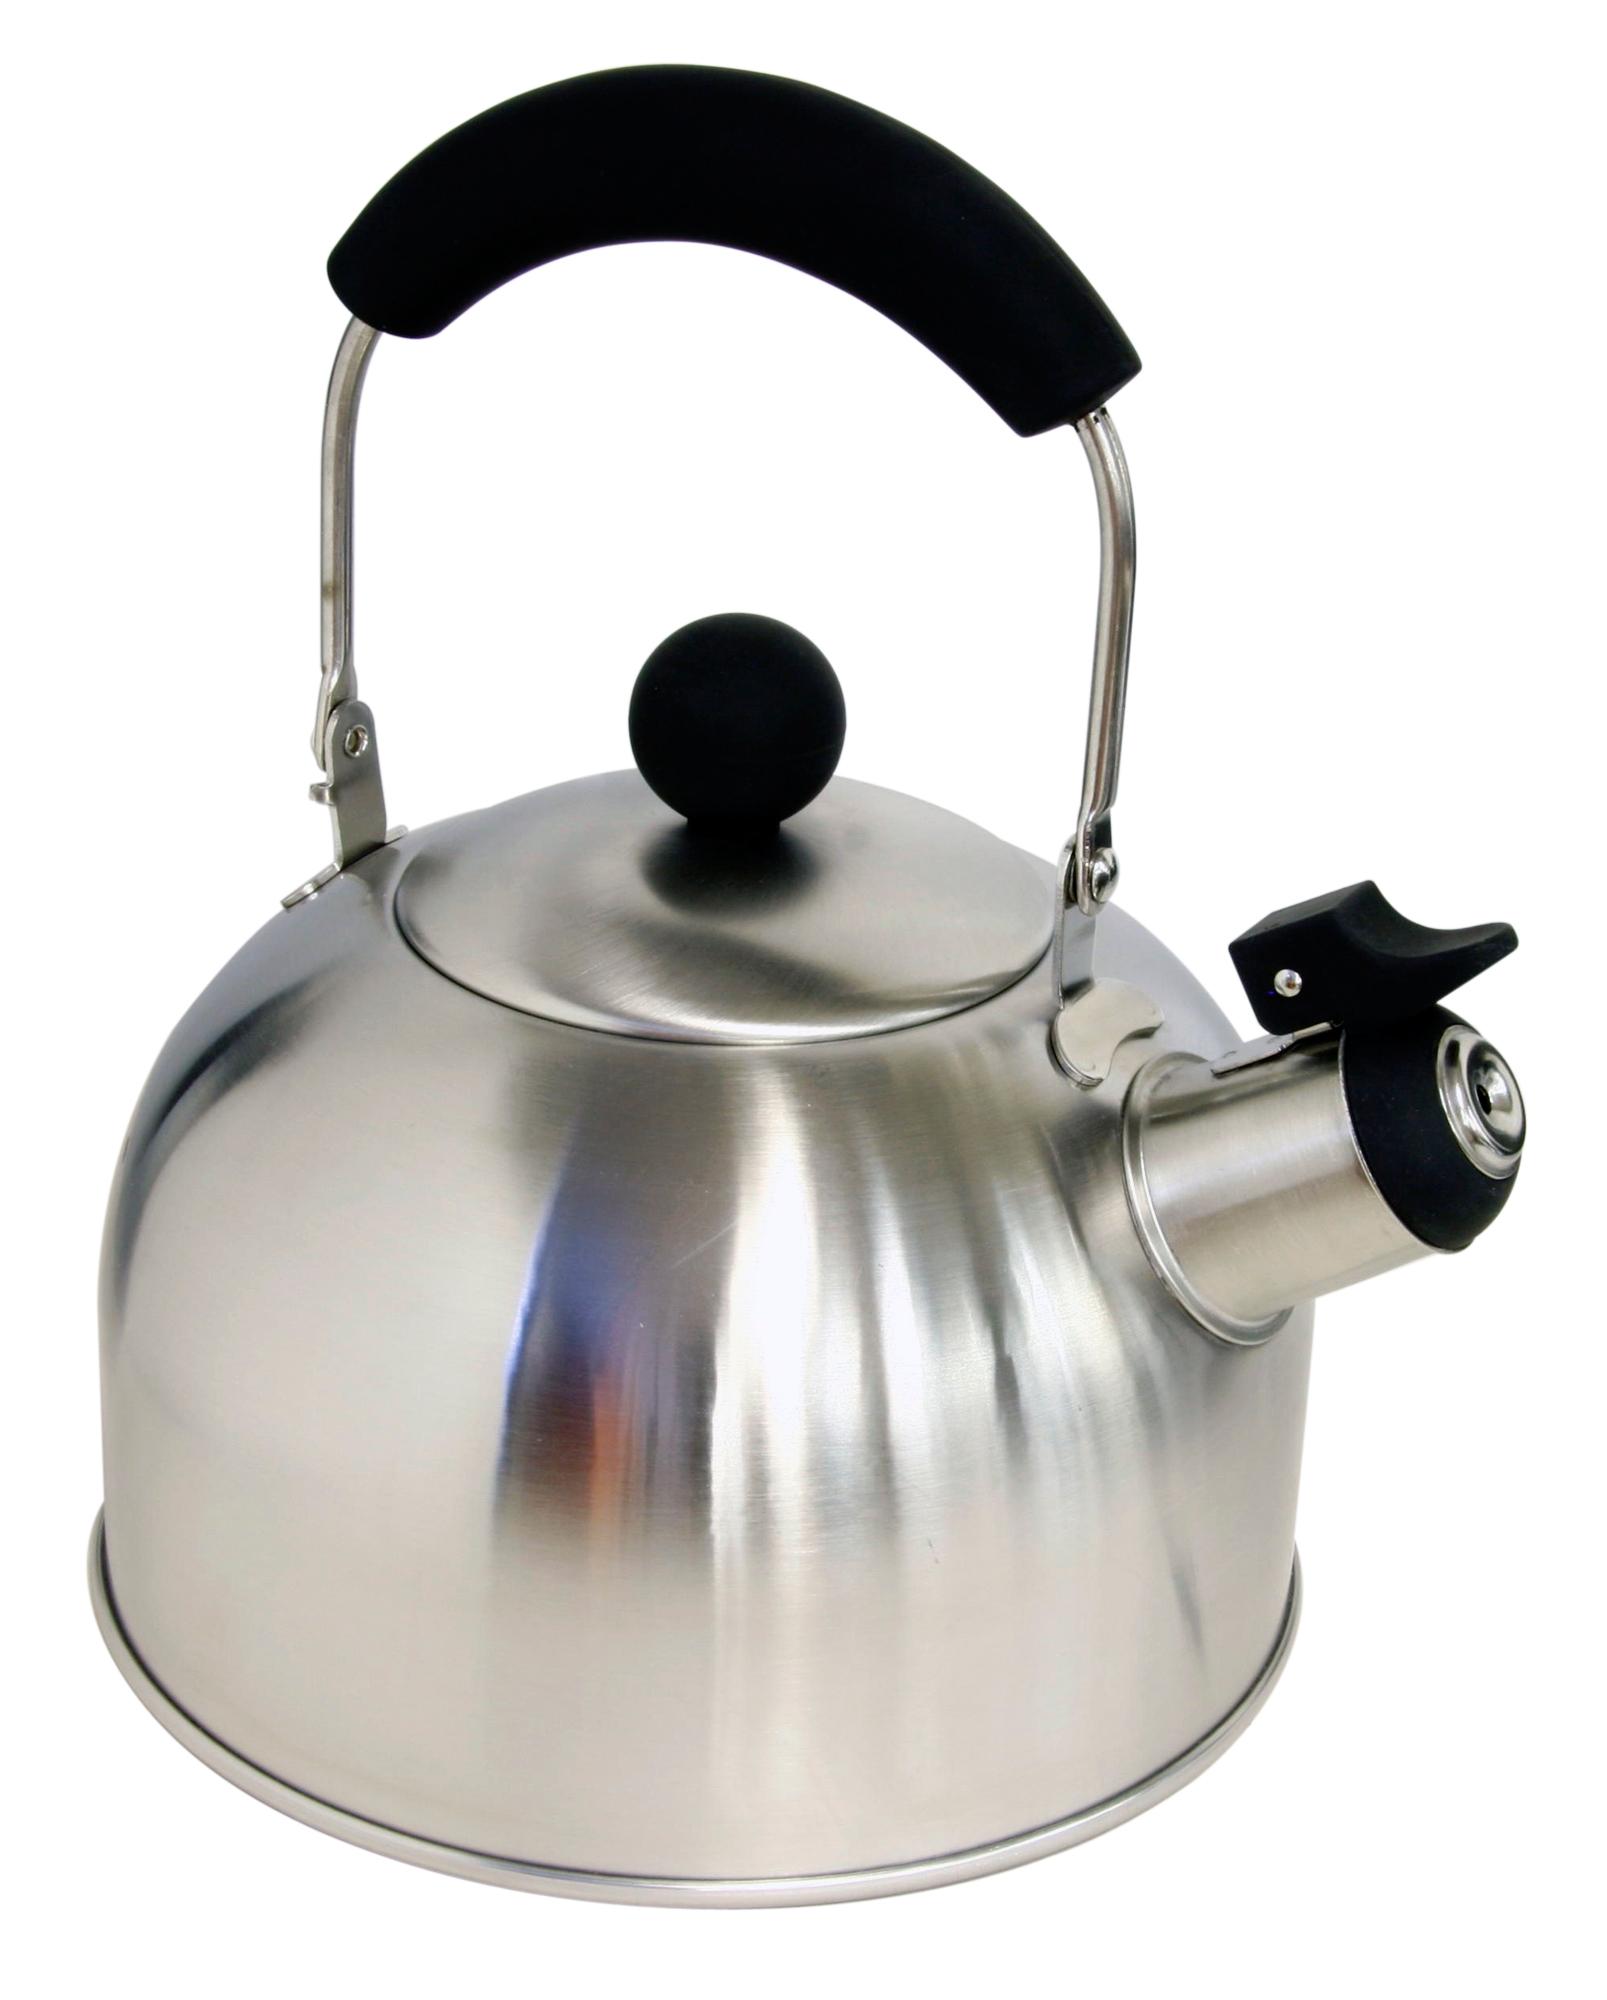 Halfords Stainless Steel Whistling Kettle